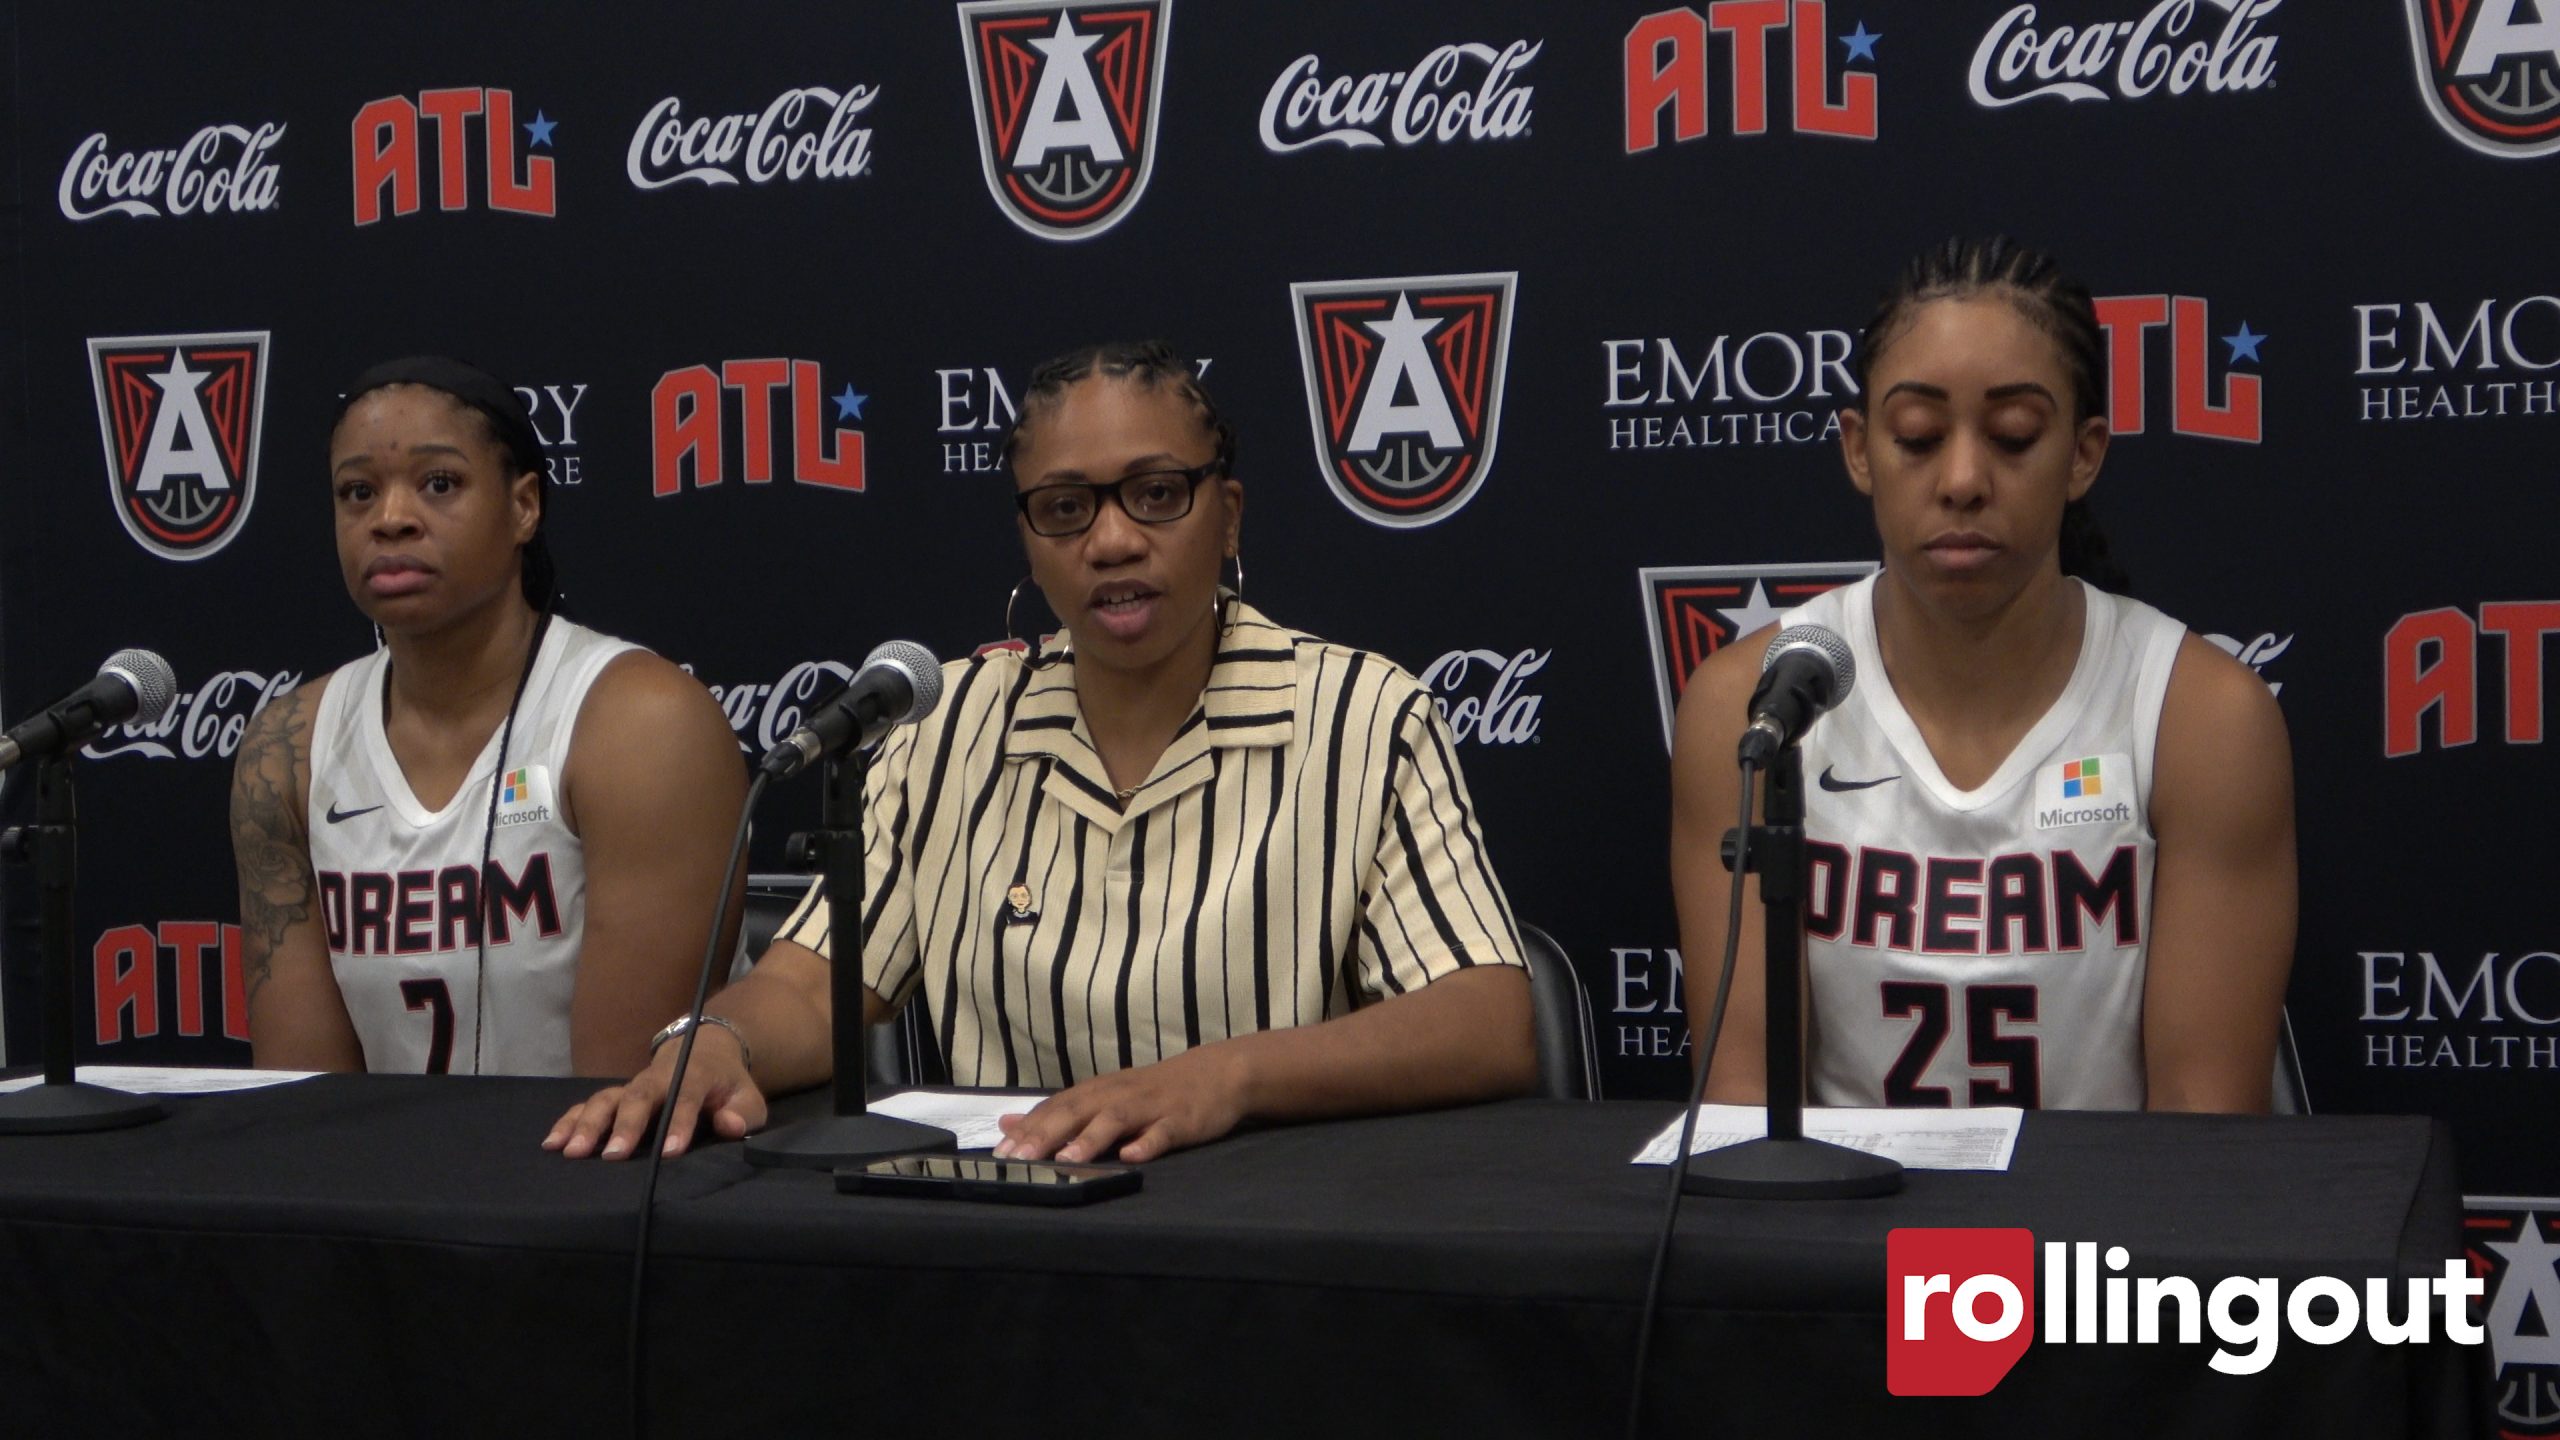 Atlanta Dream center Kia Vaughn, head coach Tanisha Wright and forward Monique Billings discuss Brittney Griner after a game on July 6, 2022. (Photo credit: Rashad Milligan for rolling out)